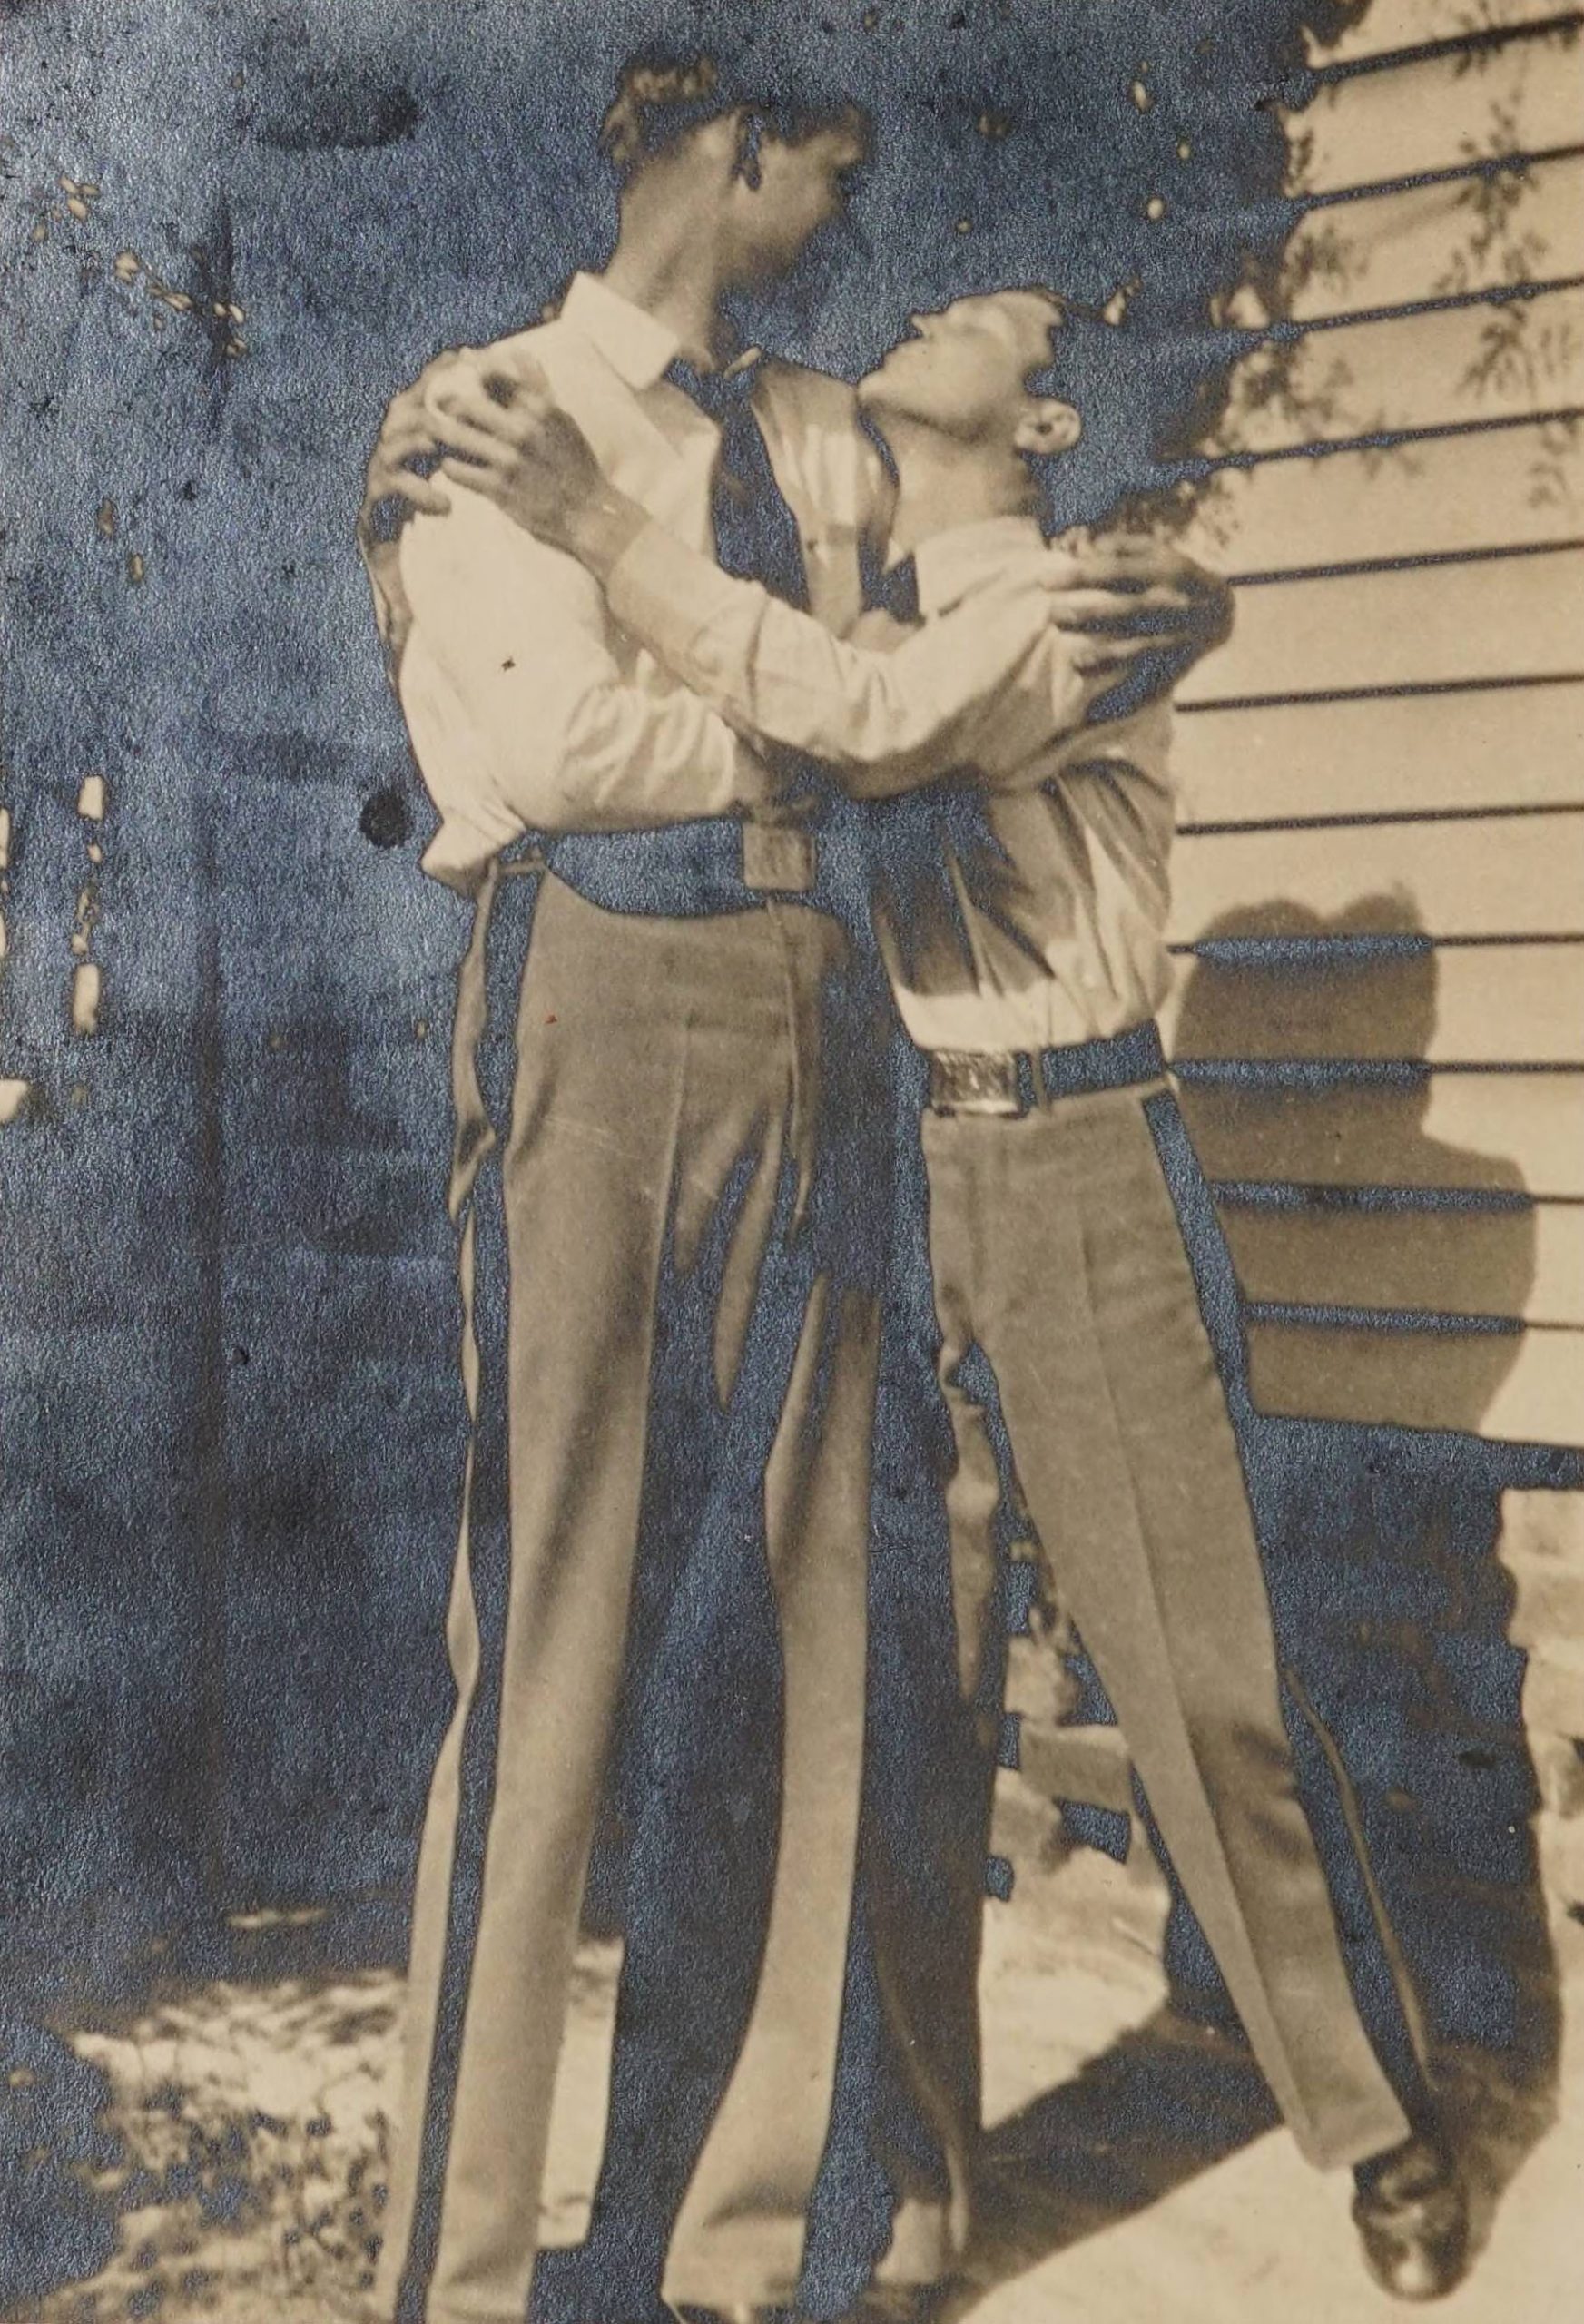 Two individuals embracing one another in a photograph which was taped in the back of the 1932 Mount Pleasant Collegiate Institute yearbook.